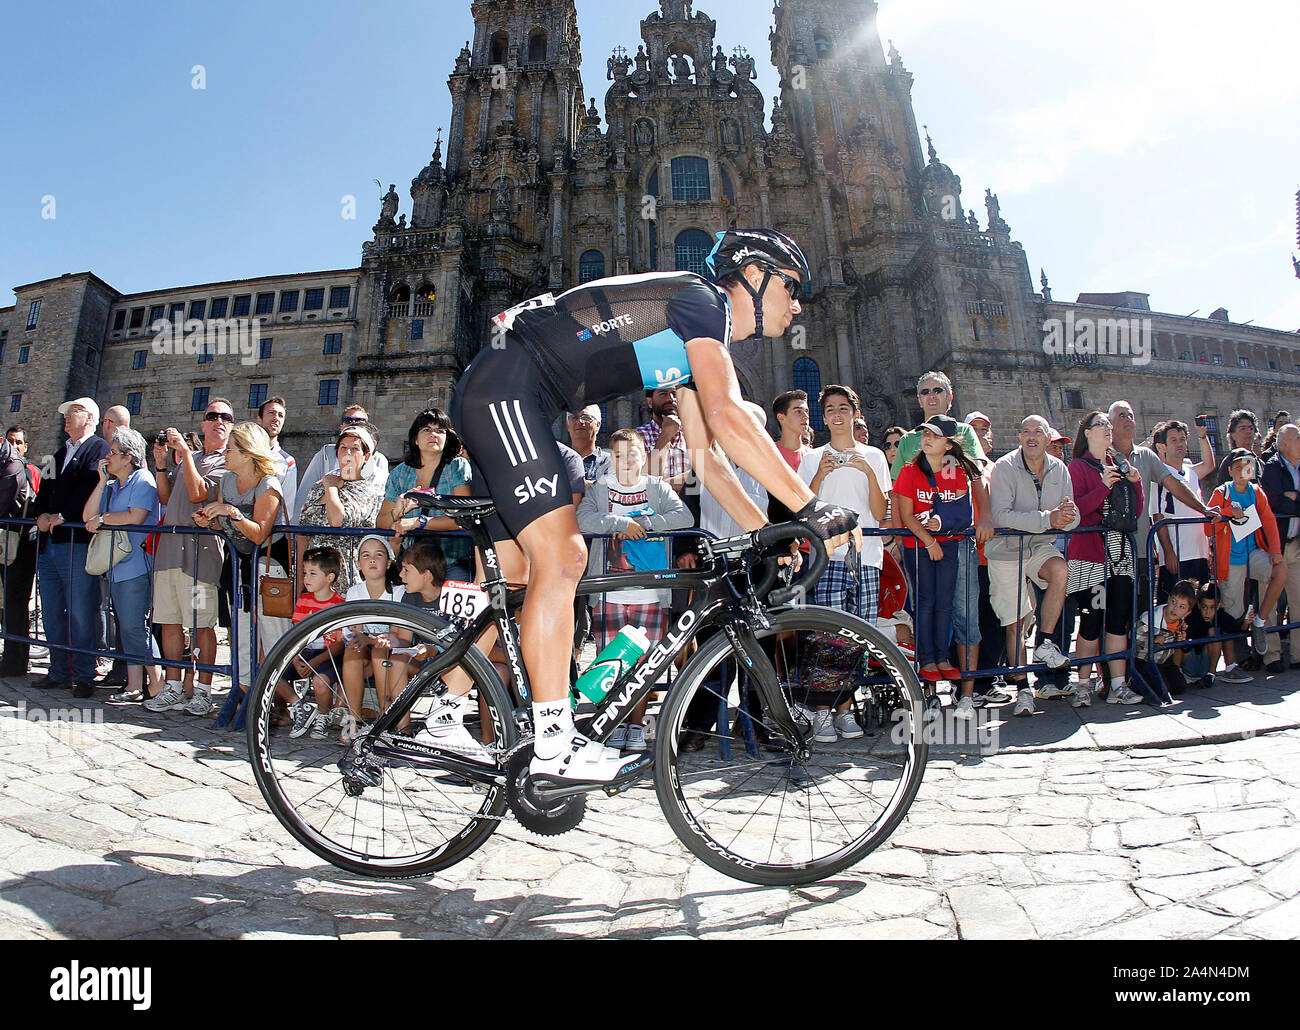 Richie Porte passes by the front of the Obradoiro of the Cathedral of Santiago de Compostela before the stage of La Vuelta 2012 between Santiago de Co Stock Photo